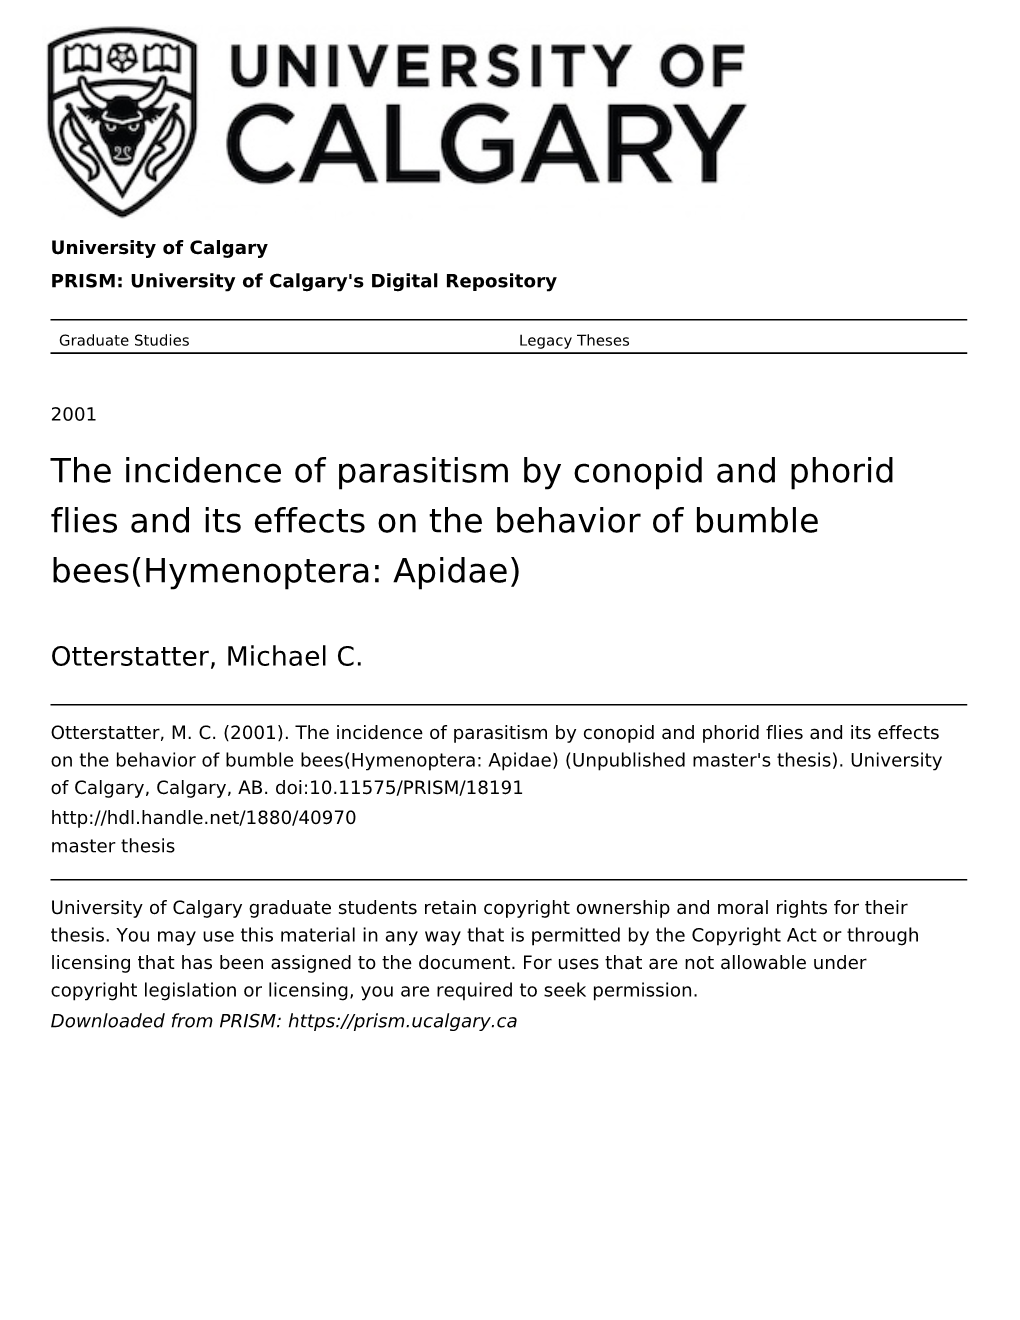 The Incidence of Parasitism by Conopid and Phorid Flies and Its Effects on the Behavior of Bumble Bees(Hymenoptera: Apidae)